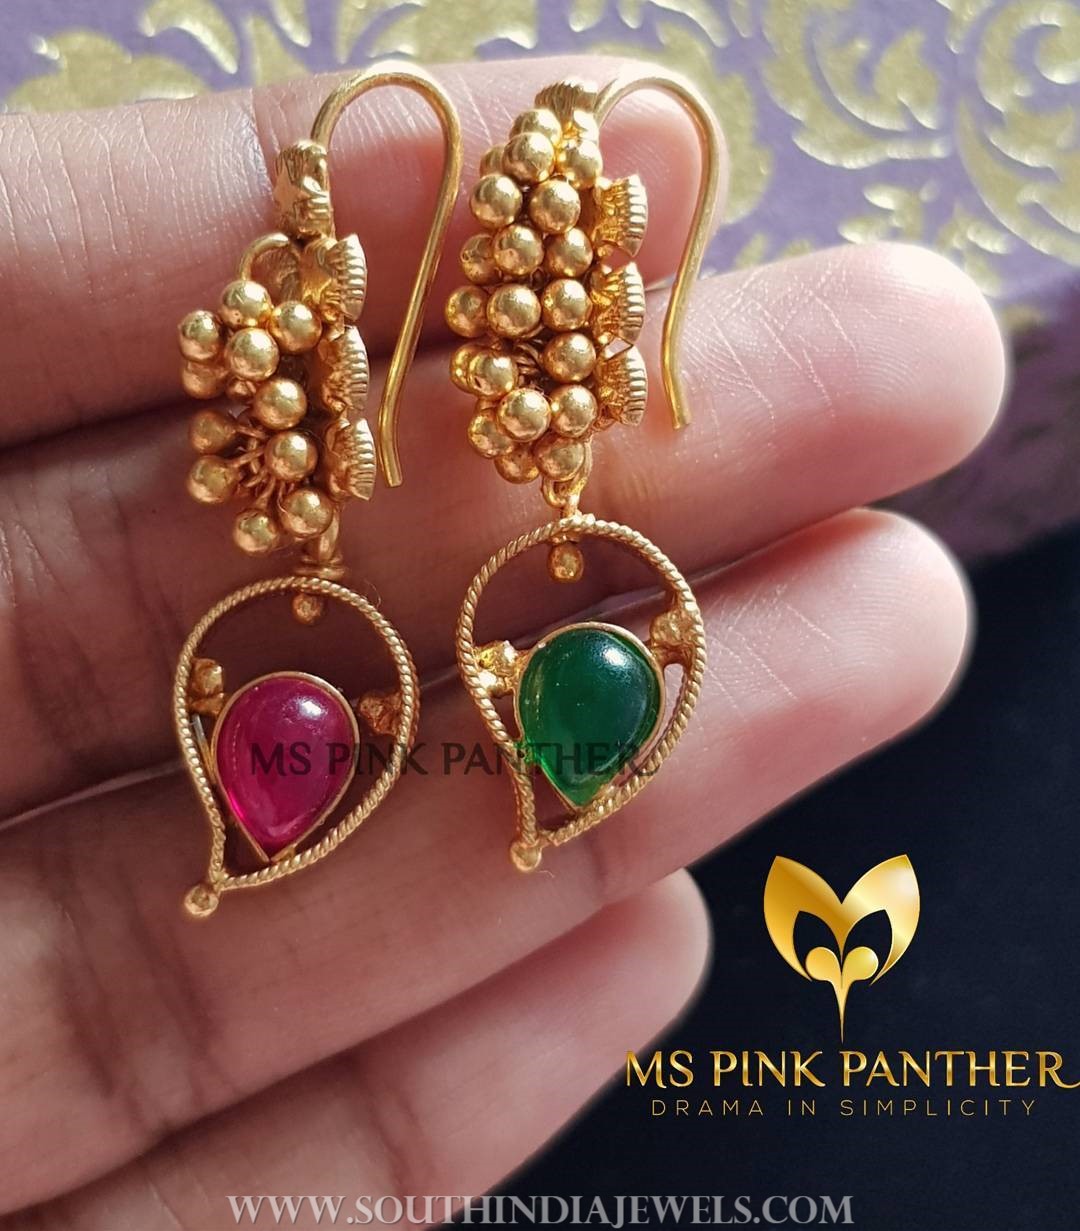 Antique Hook Earrings From Ms Pink Panthers